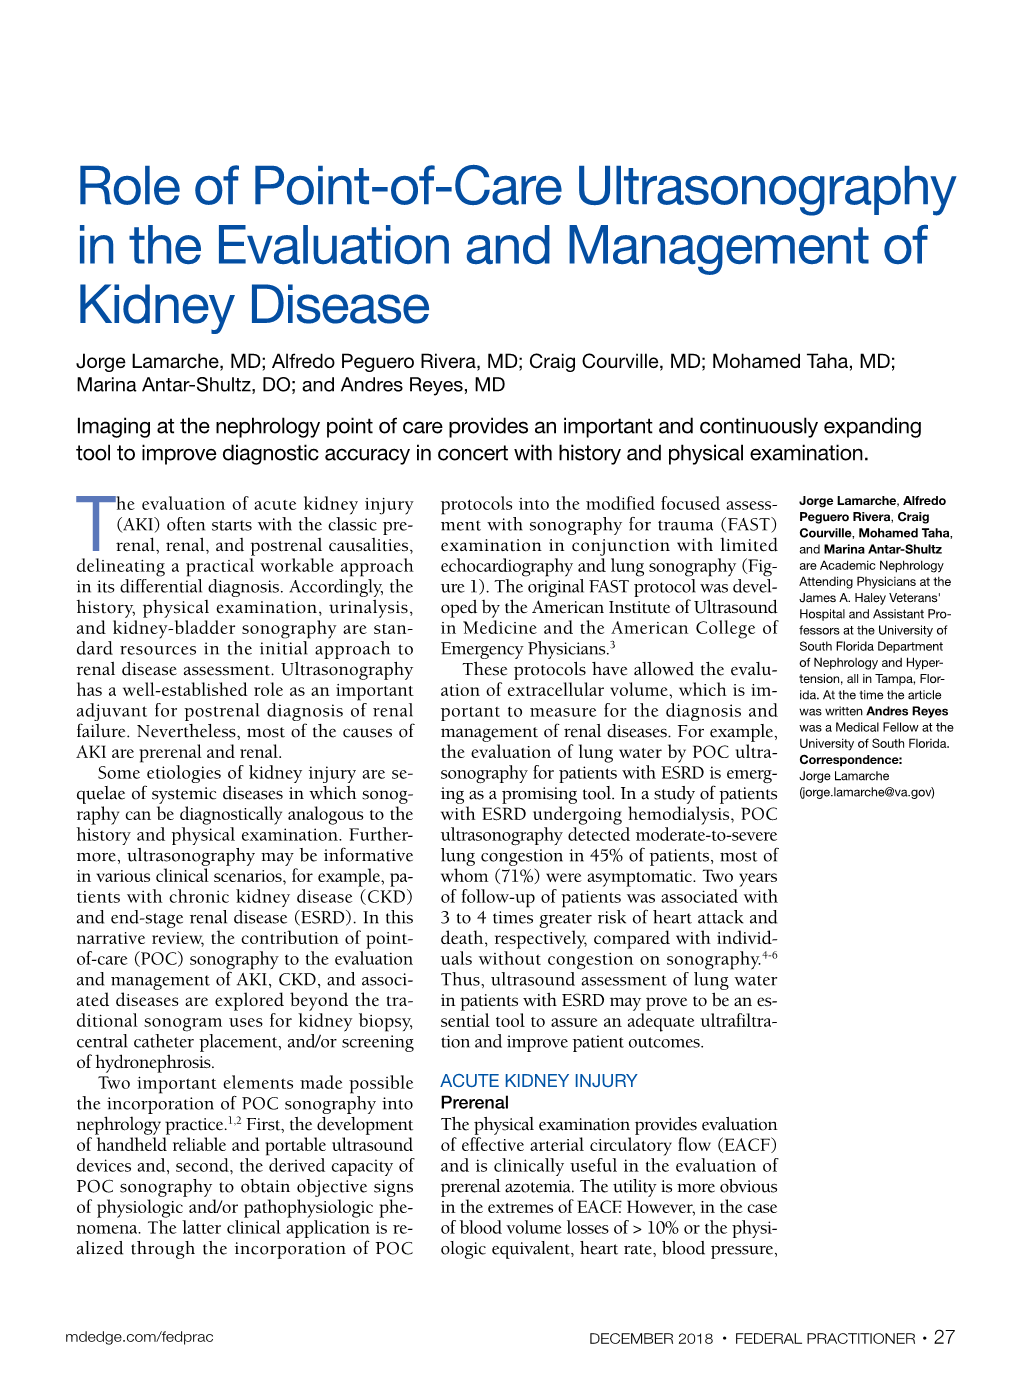 Role of Point-Of-Care Ultrasonography in the Evaluation and Management